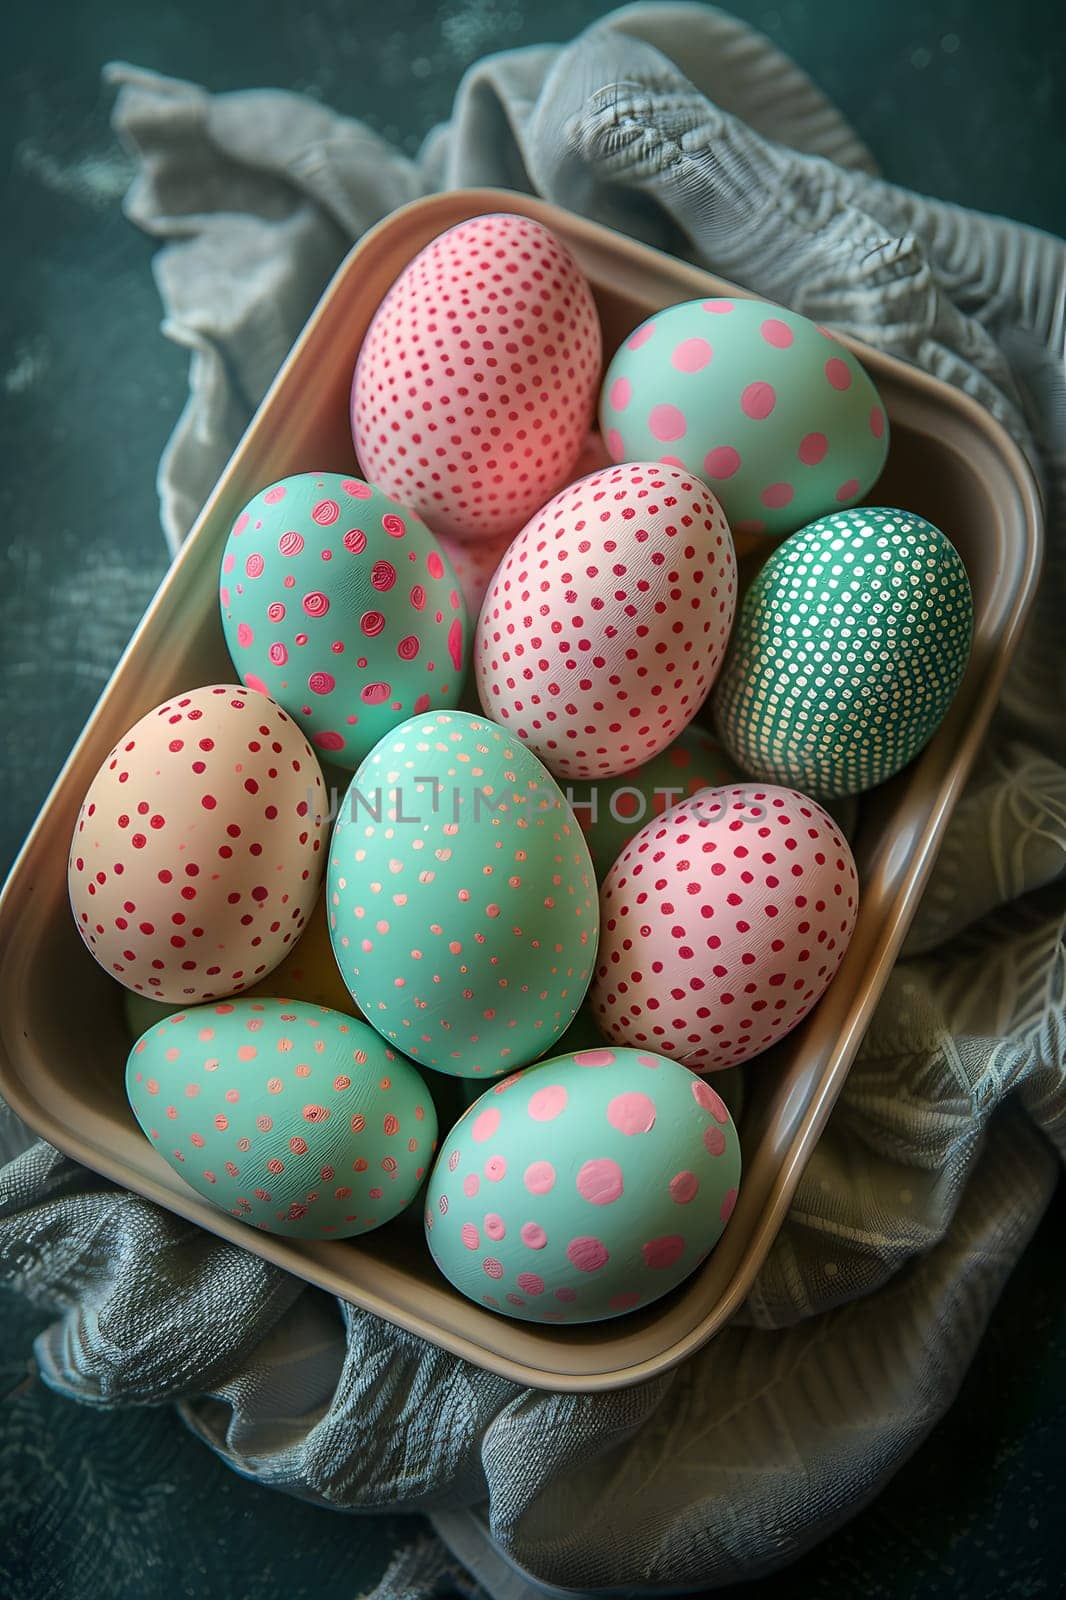 Decorative wooden tray adorned with pink and green Easter eggs by Nadtochiy